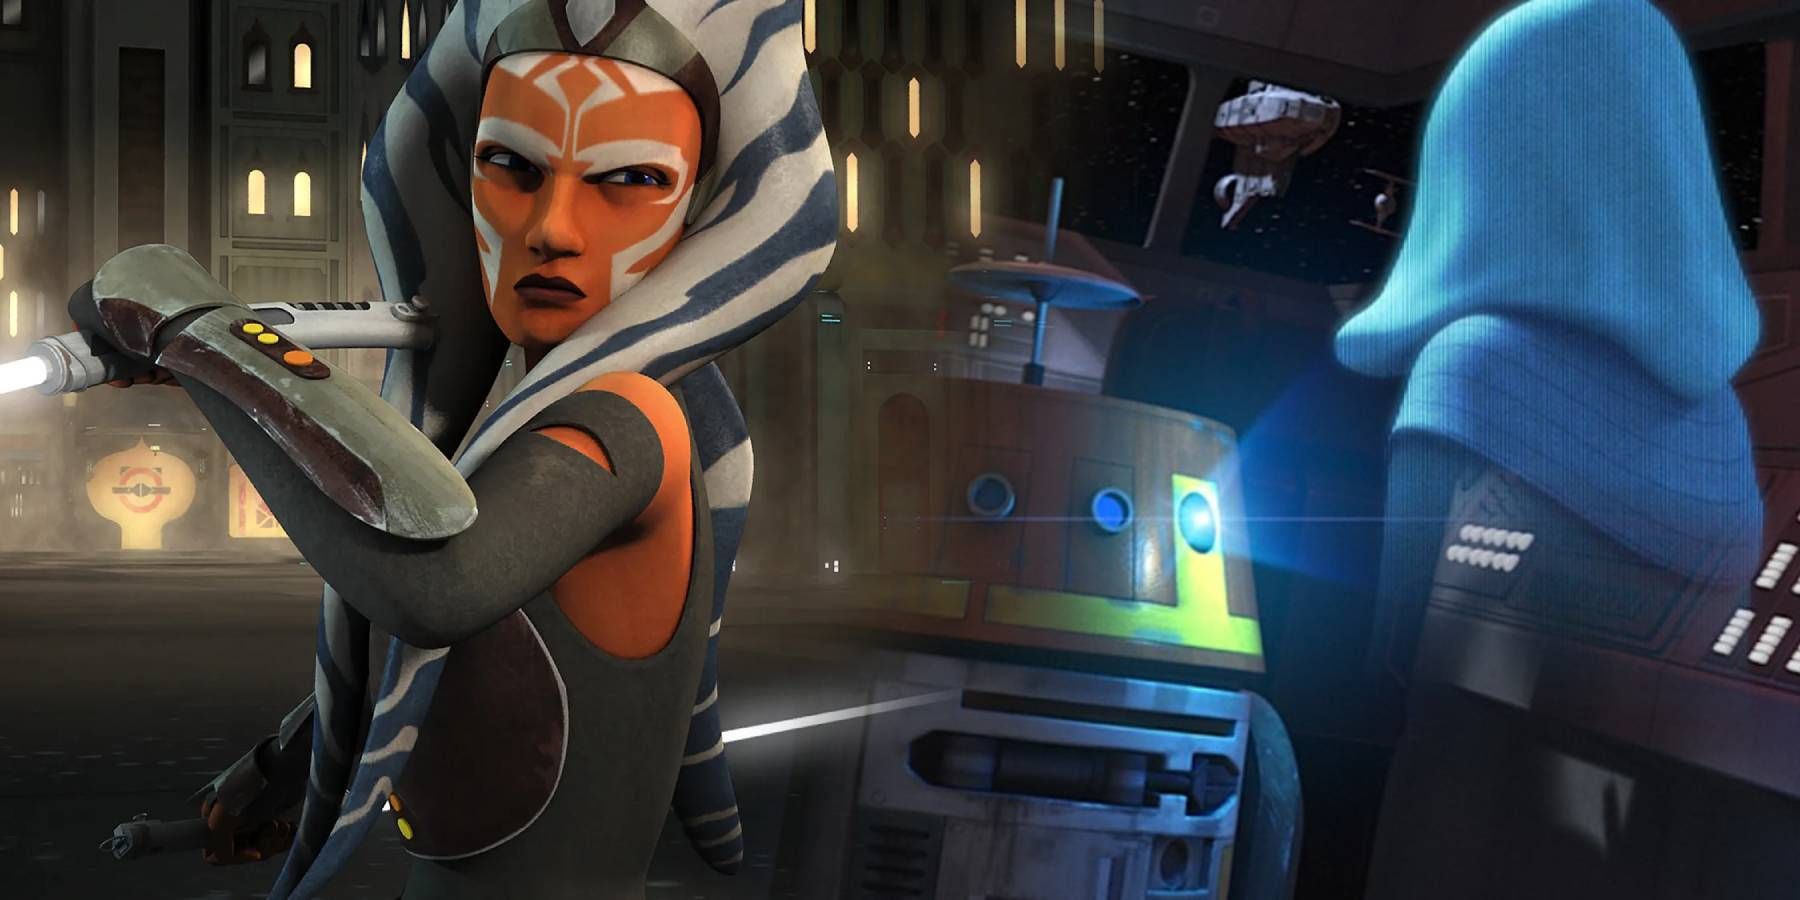 Star Wars Rebels' Ahsoka Tano And Fulcrum Tie Was Missed By Some Fans